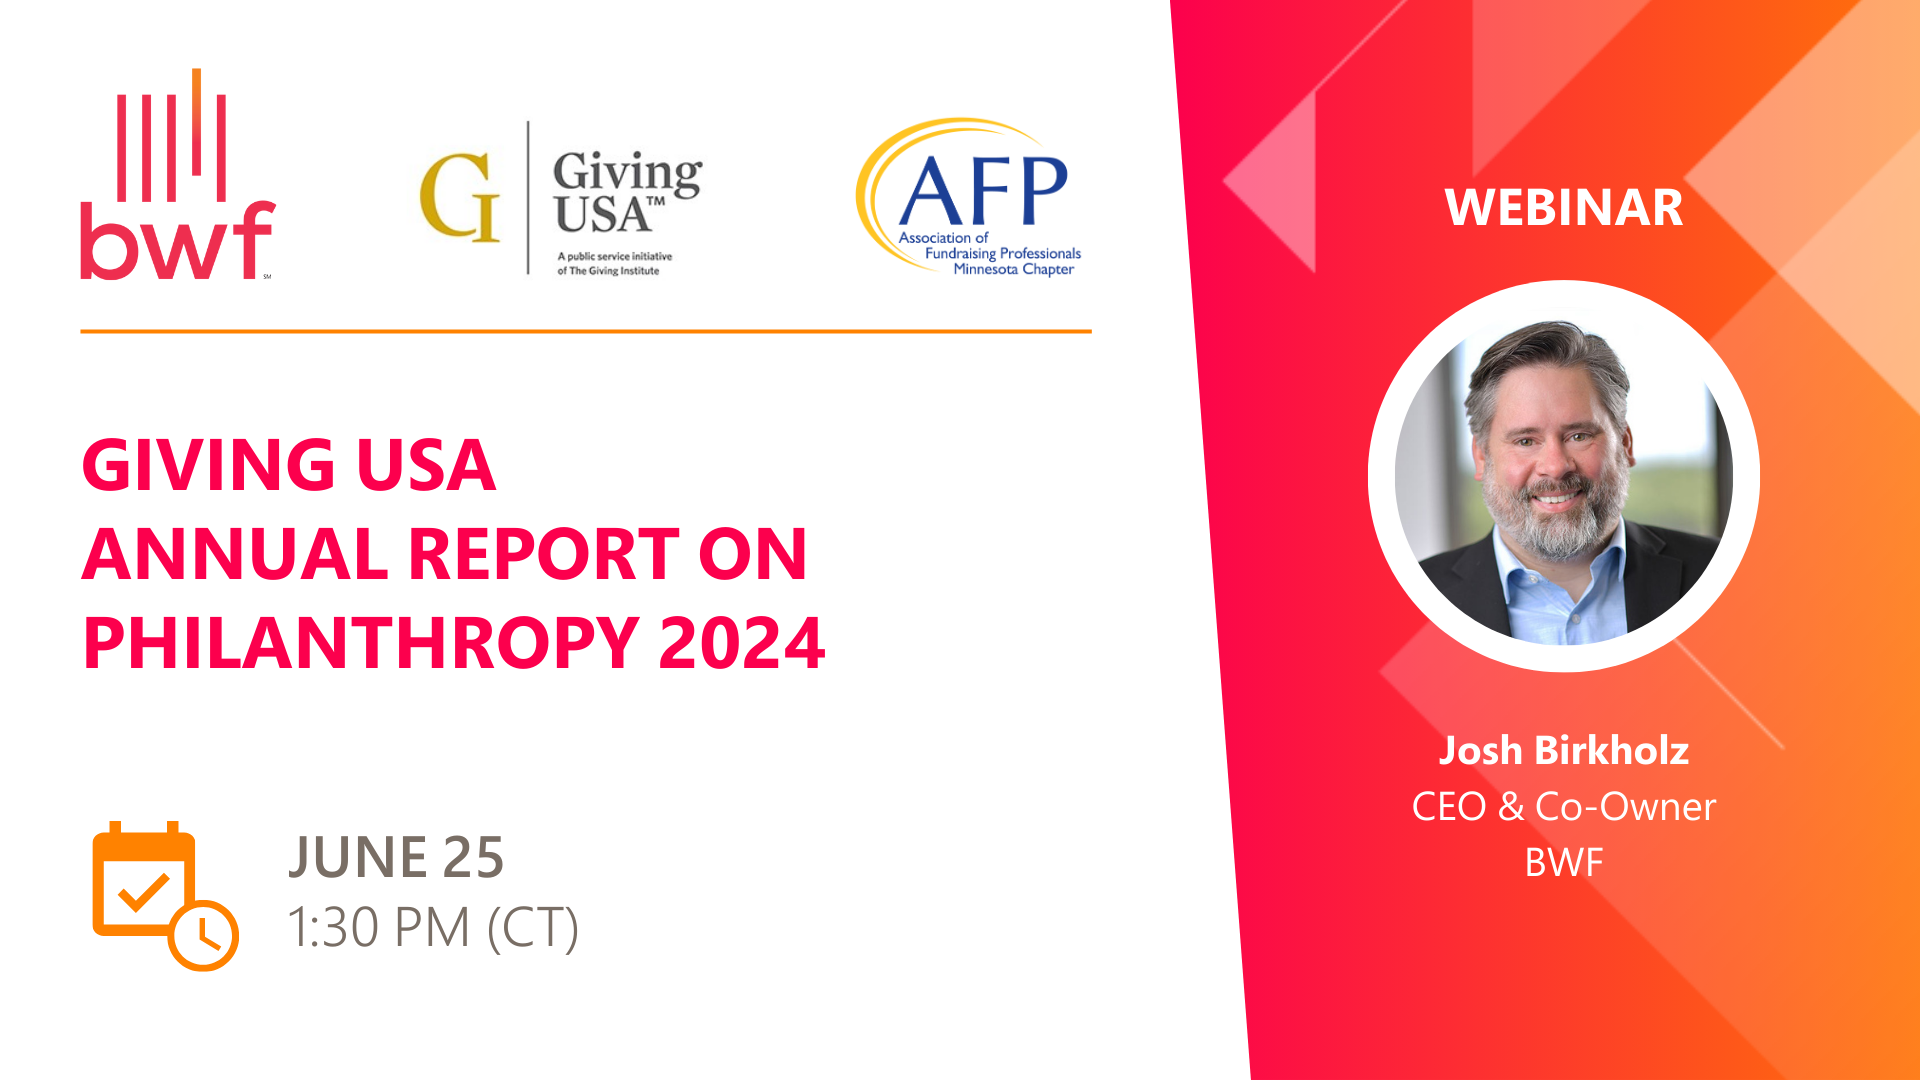 Giving USA Annual Report on Philanthropy 2024